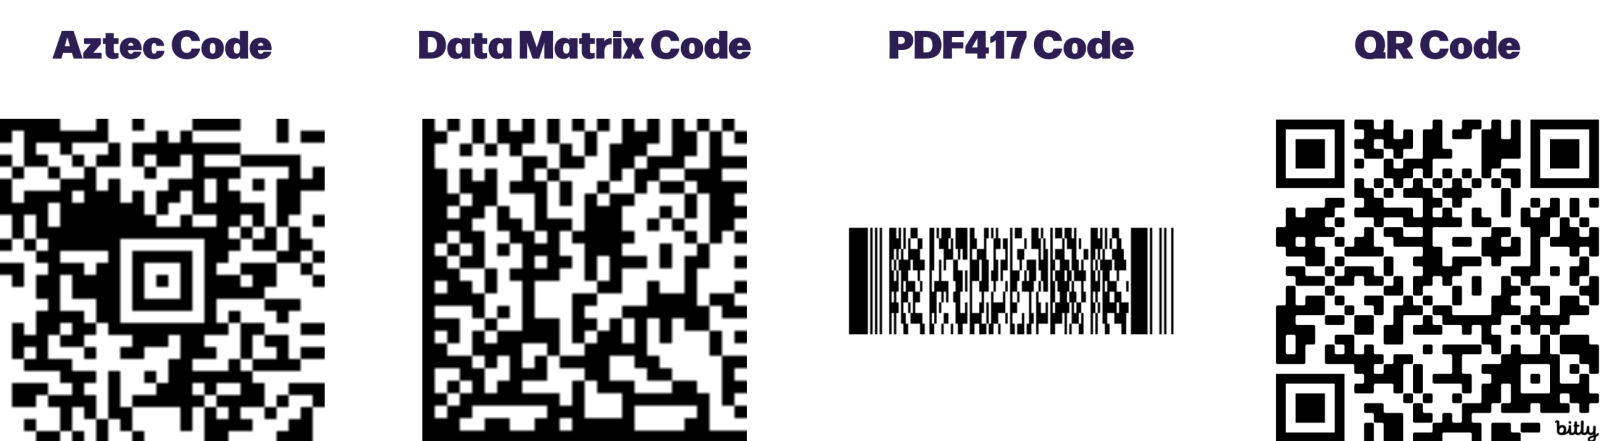 Four types of 2D barcodes